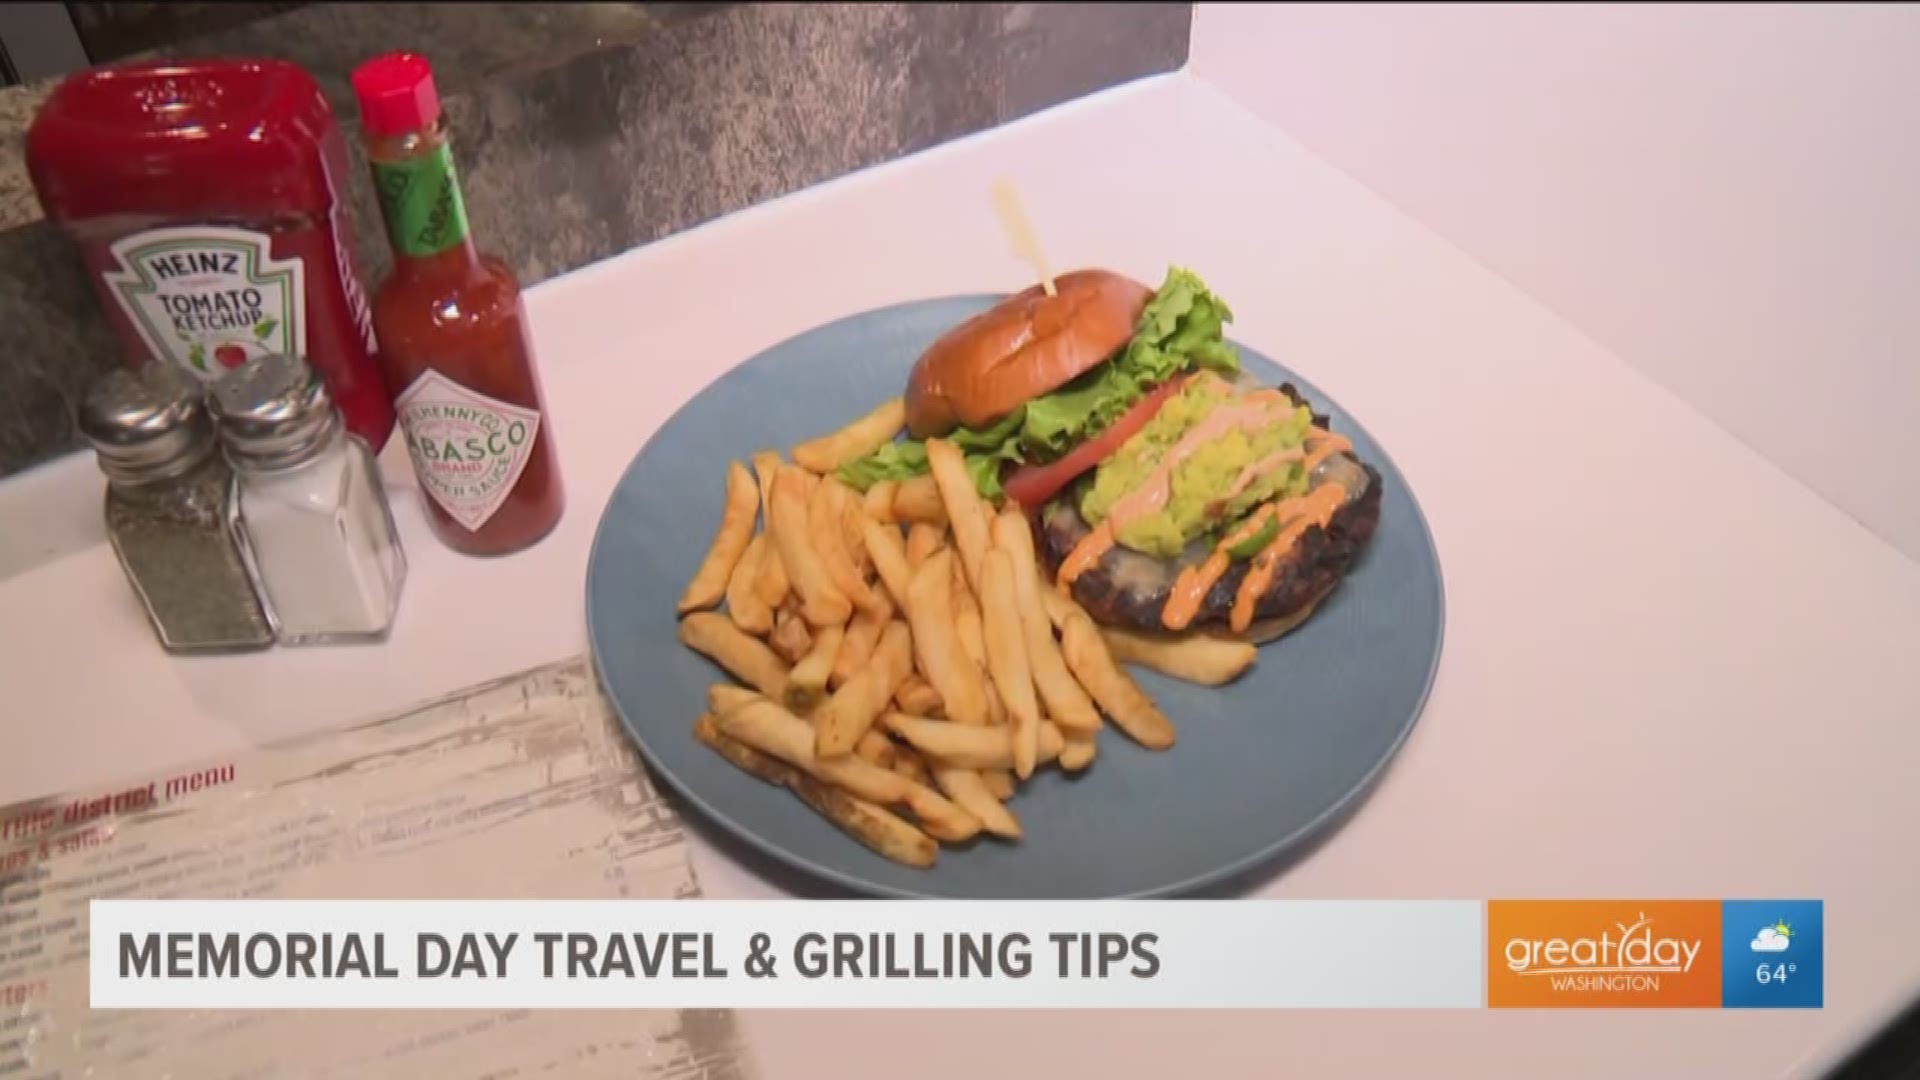 According to AAA more than 43 million Americans are traveling over the Memorial Day weekend and Andi Hauser stops by Reagan National Airport to check out some of the popular eateries while you wait for your flight.